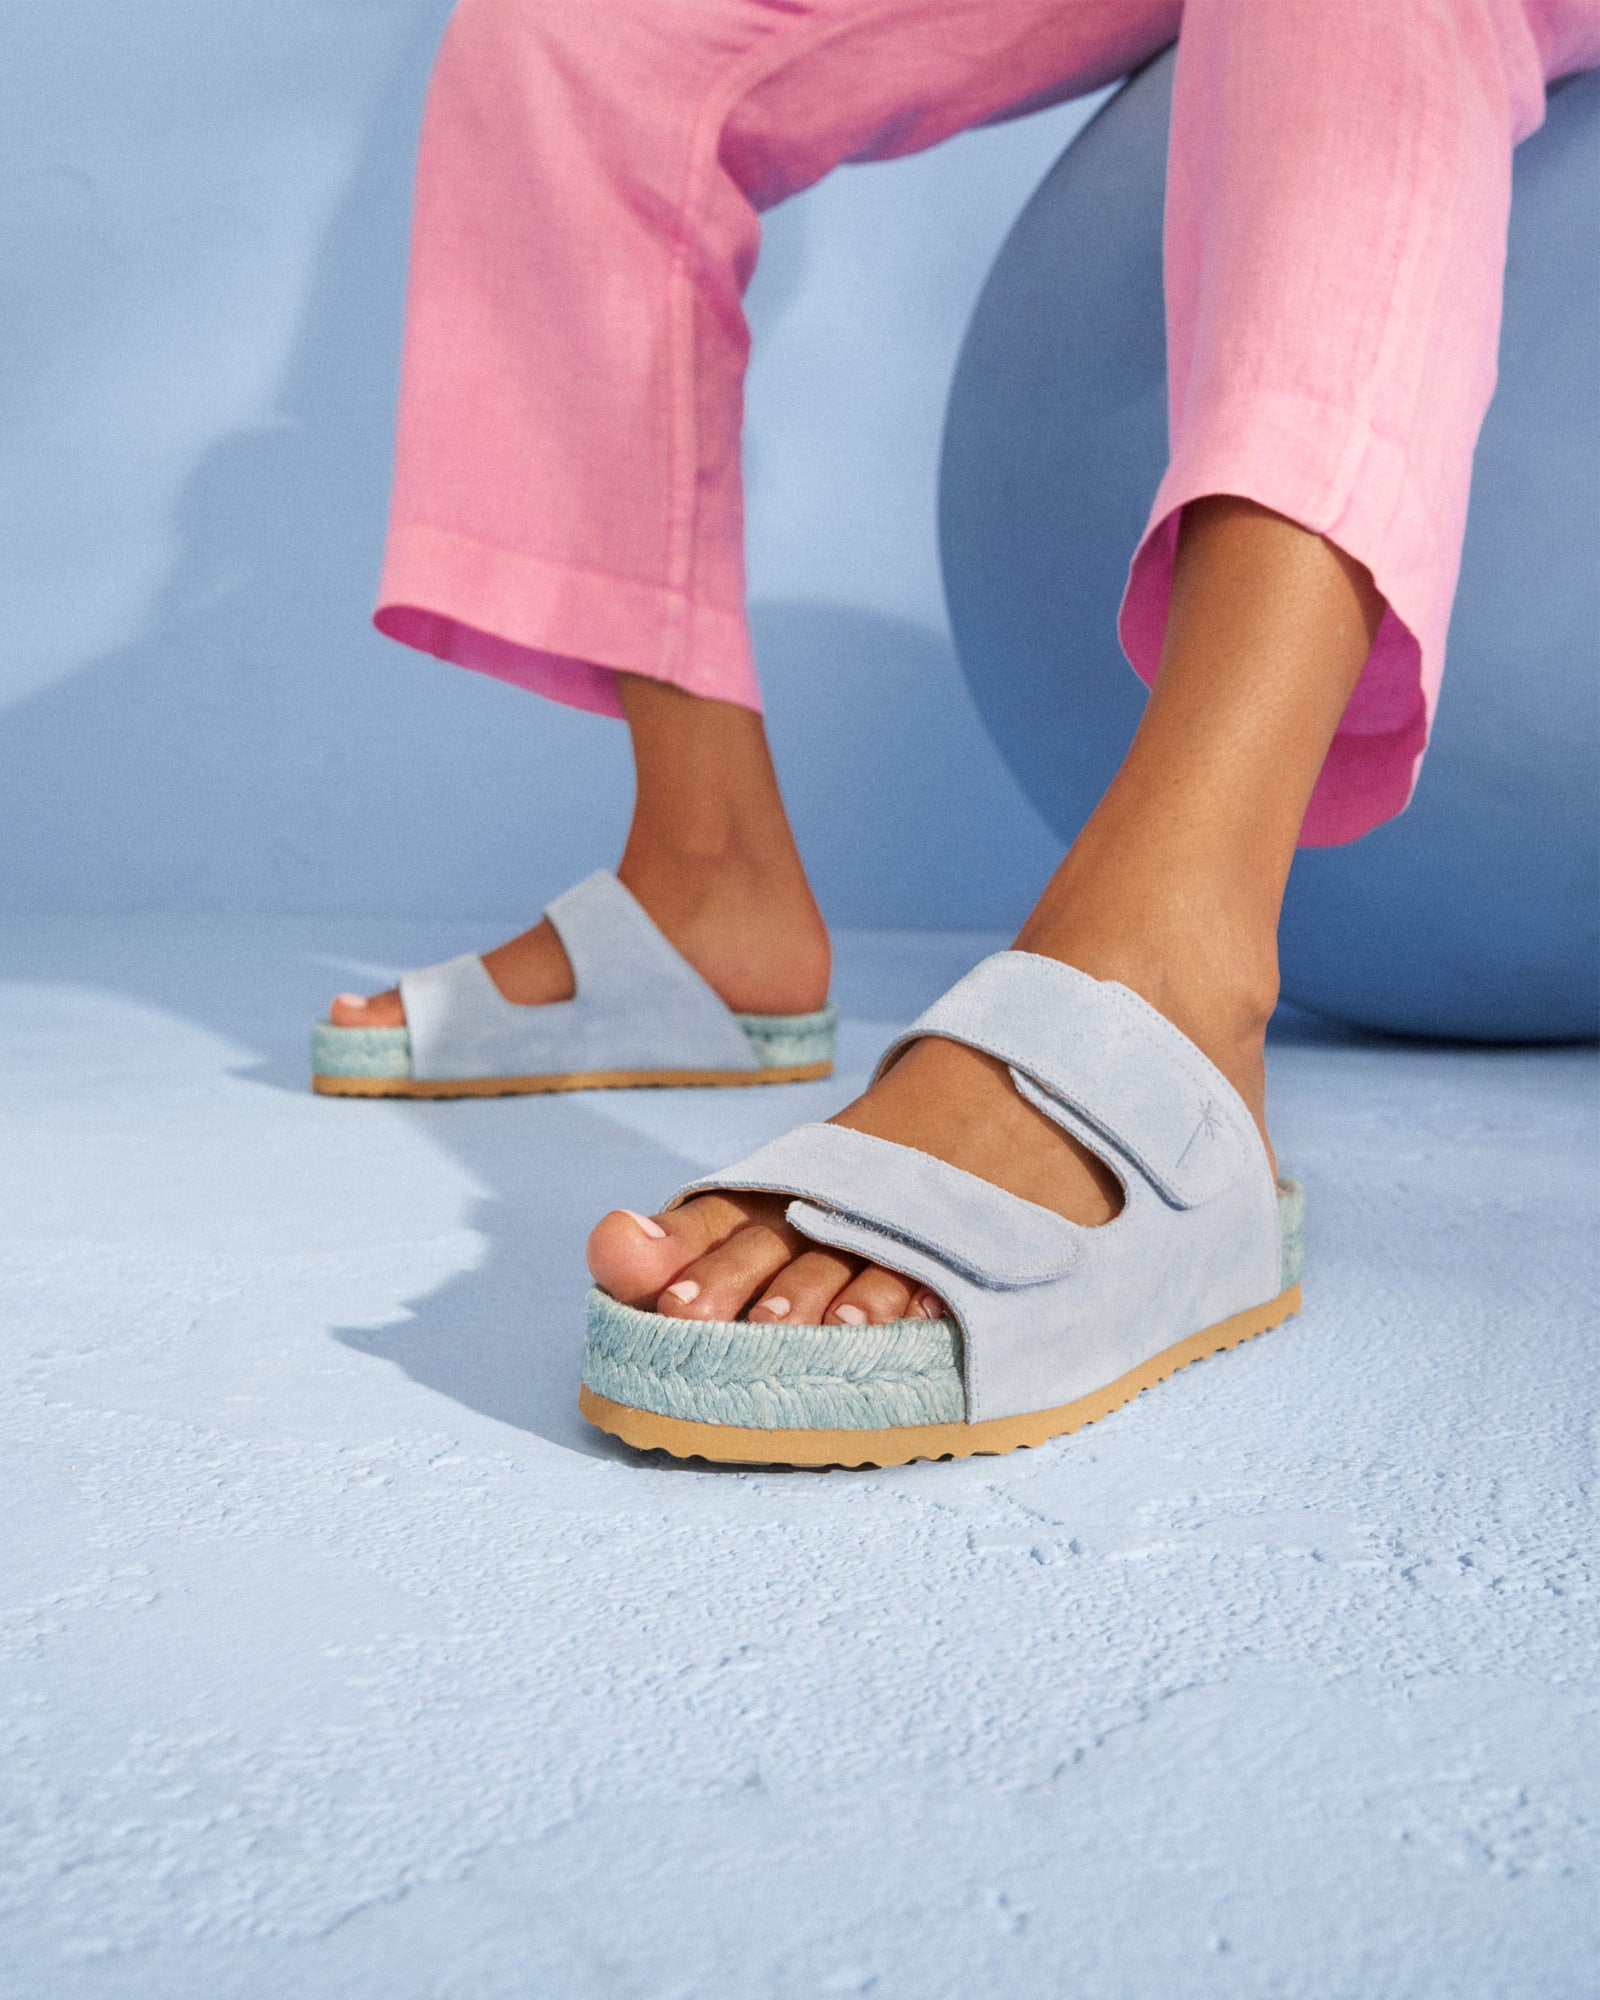 Suede Nordic Sandals - Touch Strap - North Sea Blue On Tone